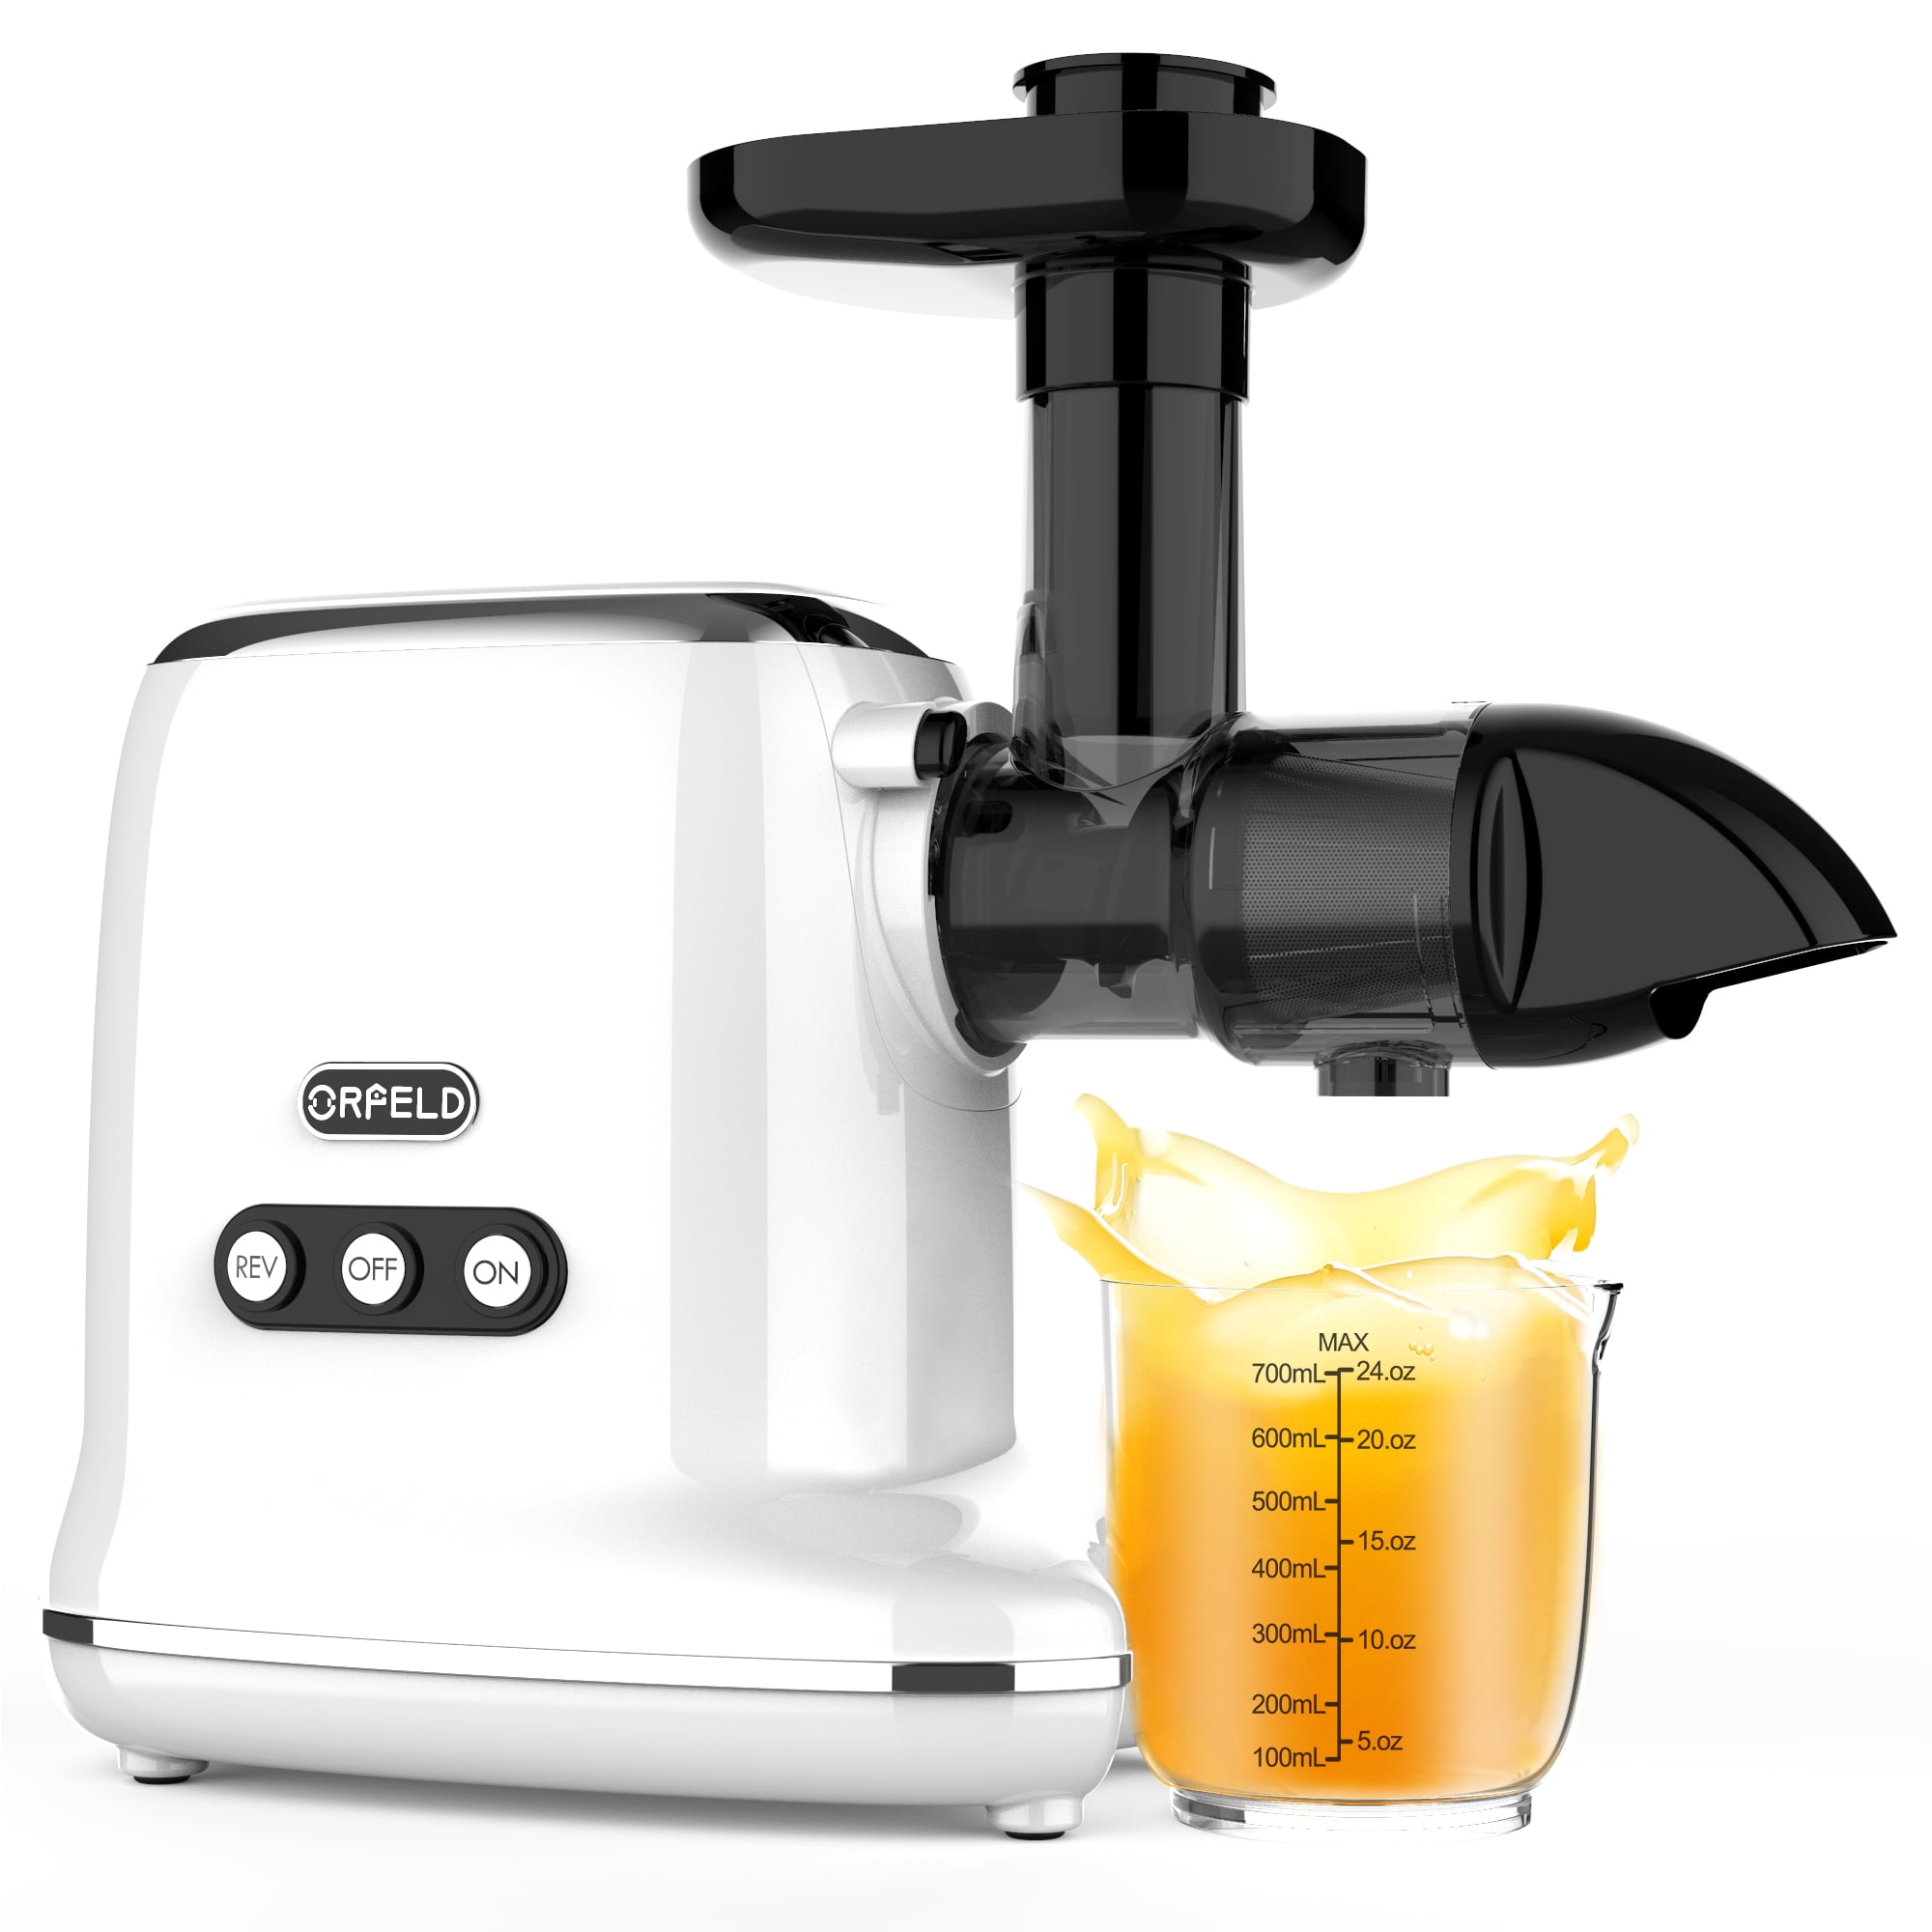 Easy Cleaning & Quiet Motor Masticating Juicer Machines for Vegetables and Fruits Renewed Orfeld Cold Press Juicer with 95% Juice Yield & Purest Juice Green Juicer Machines